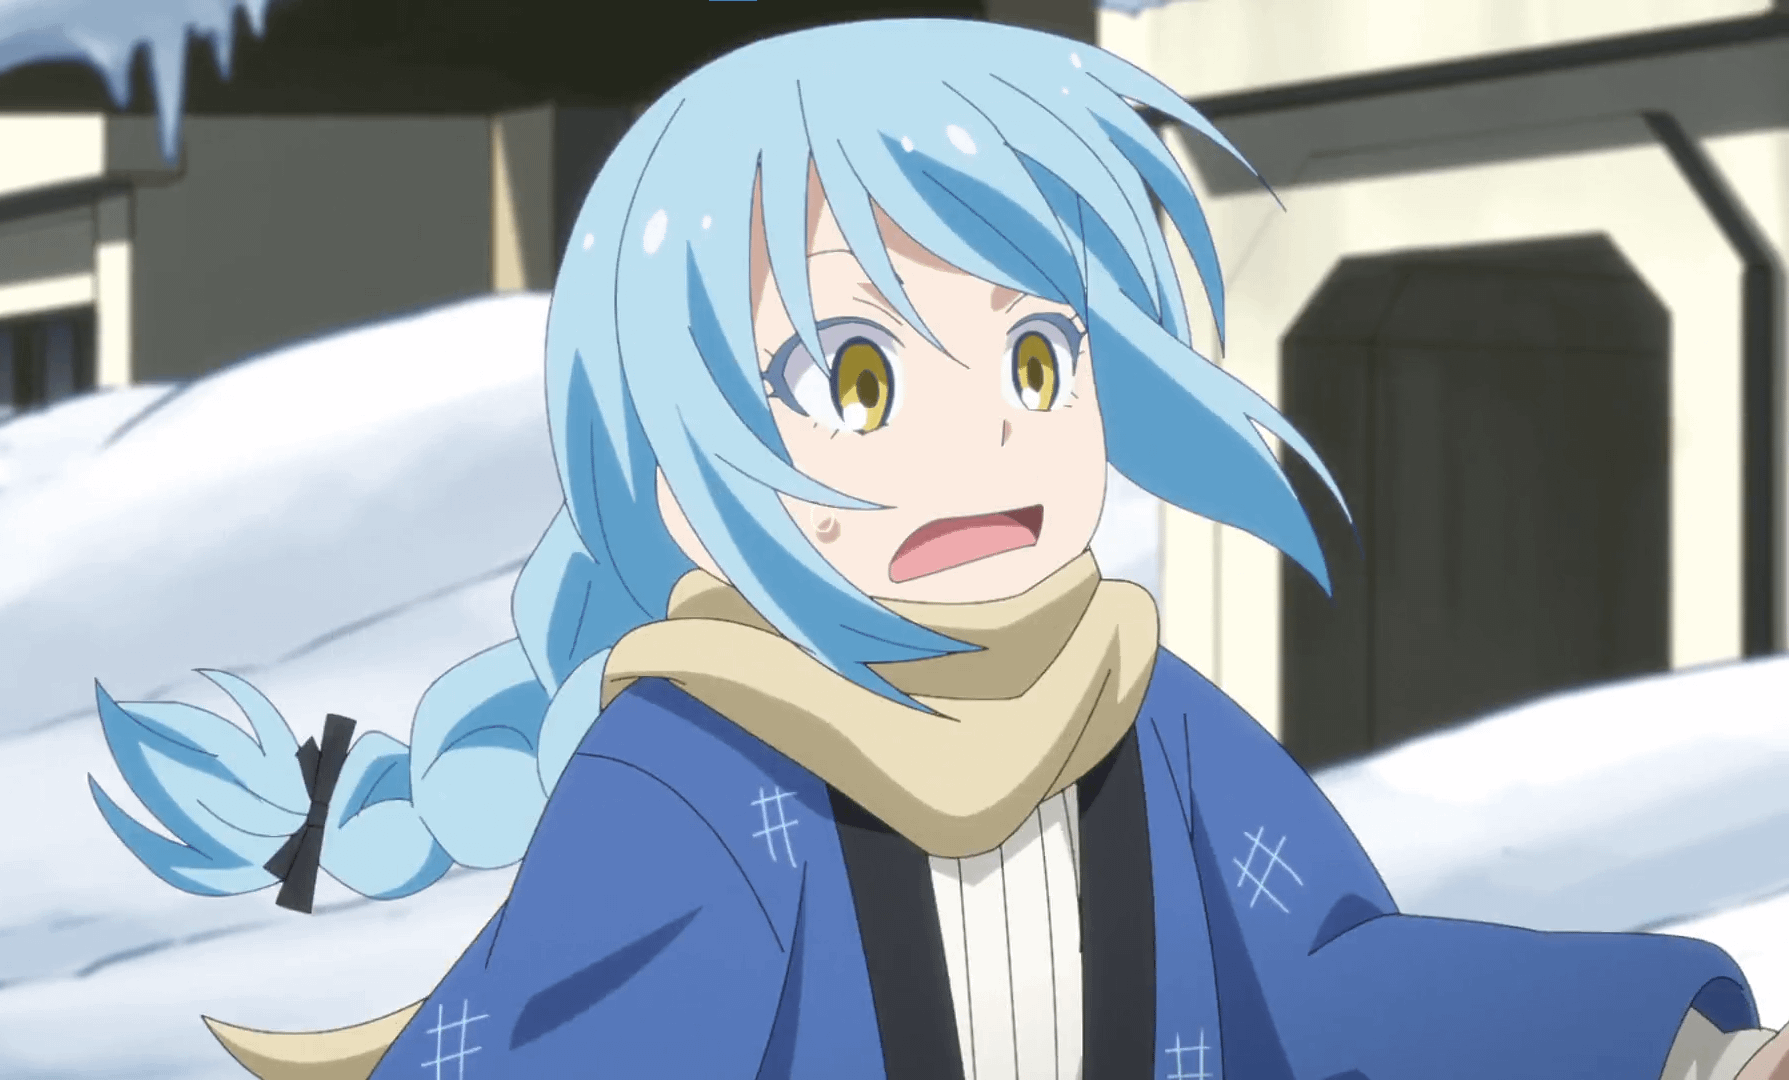 That Time I Got Reincarnated as a Slime: Visions of Coleus (TV